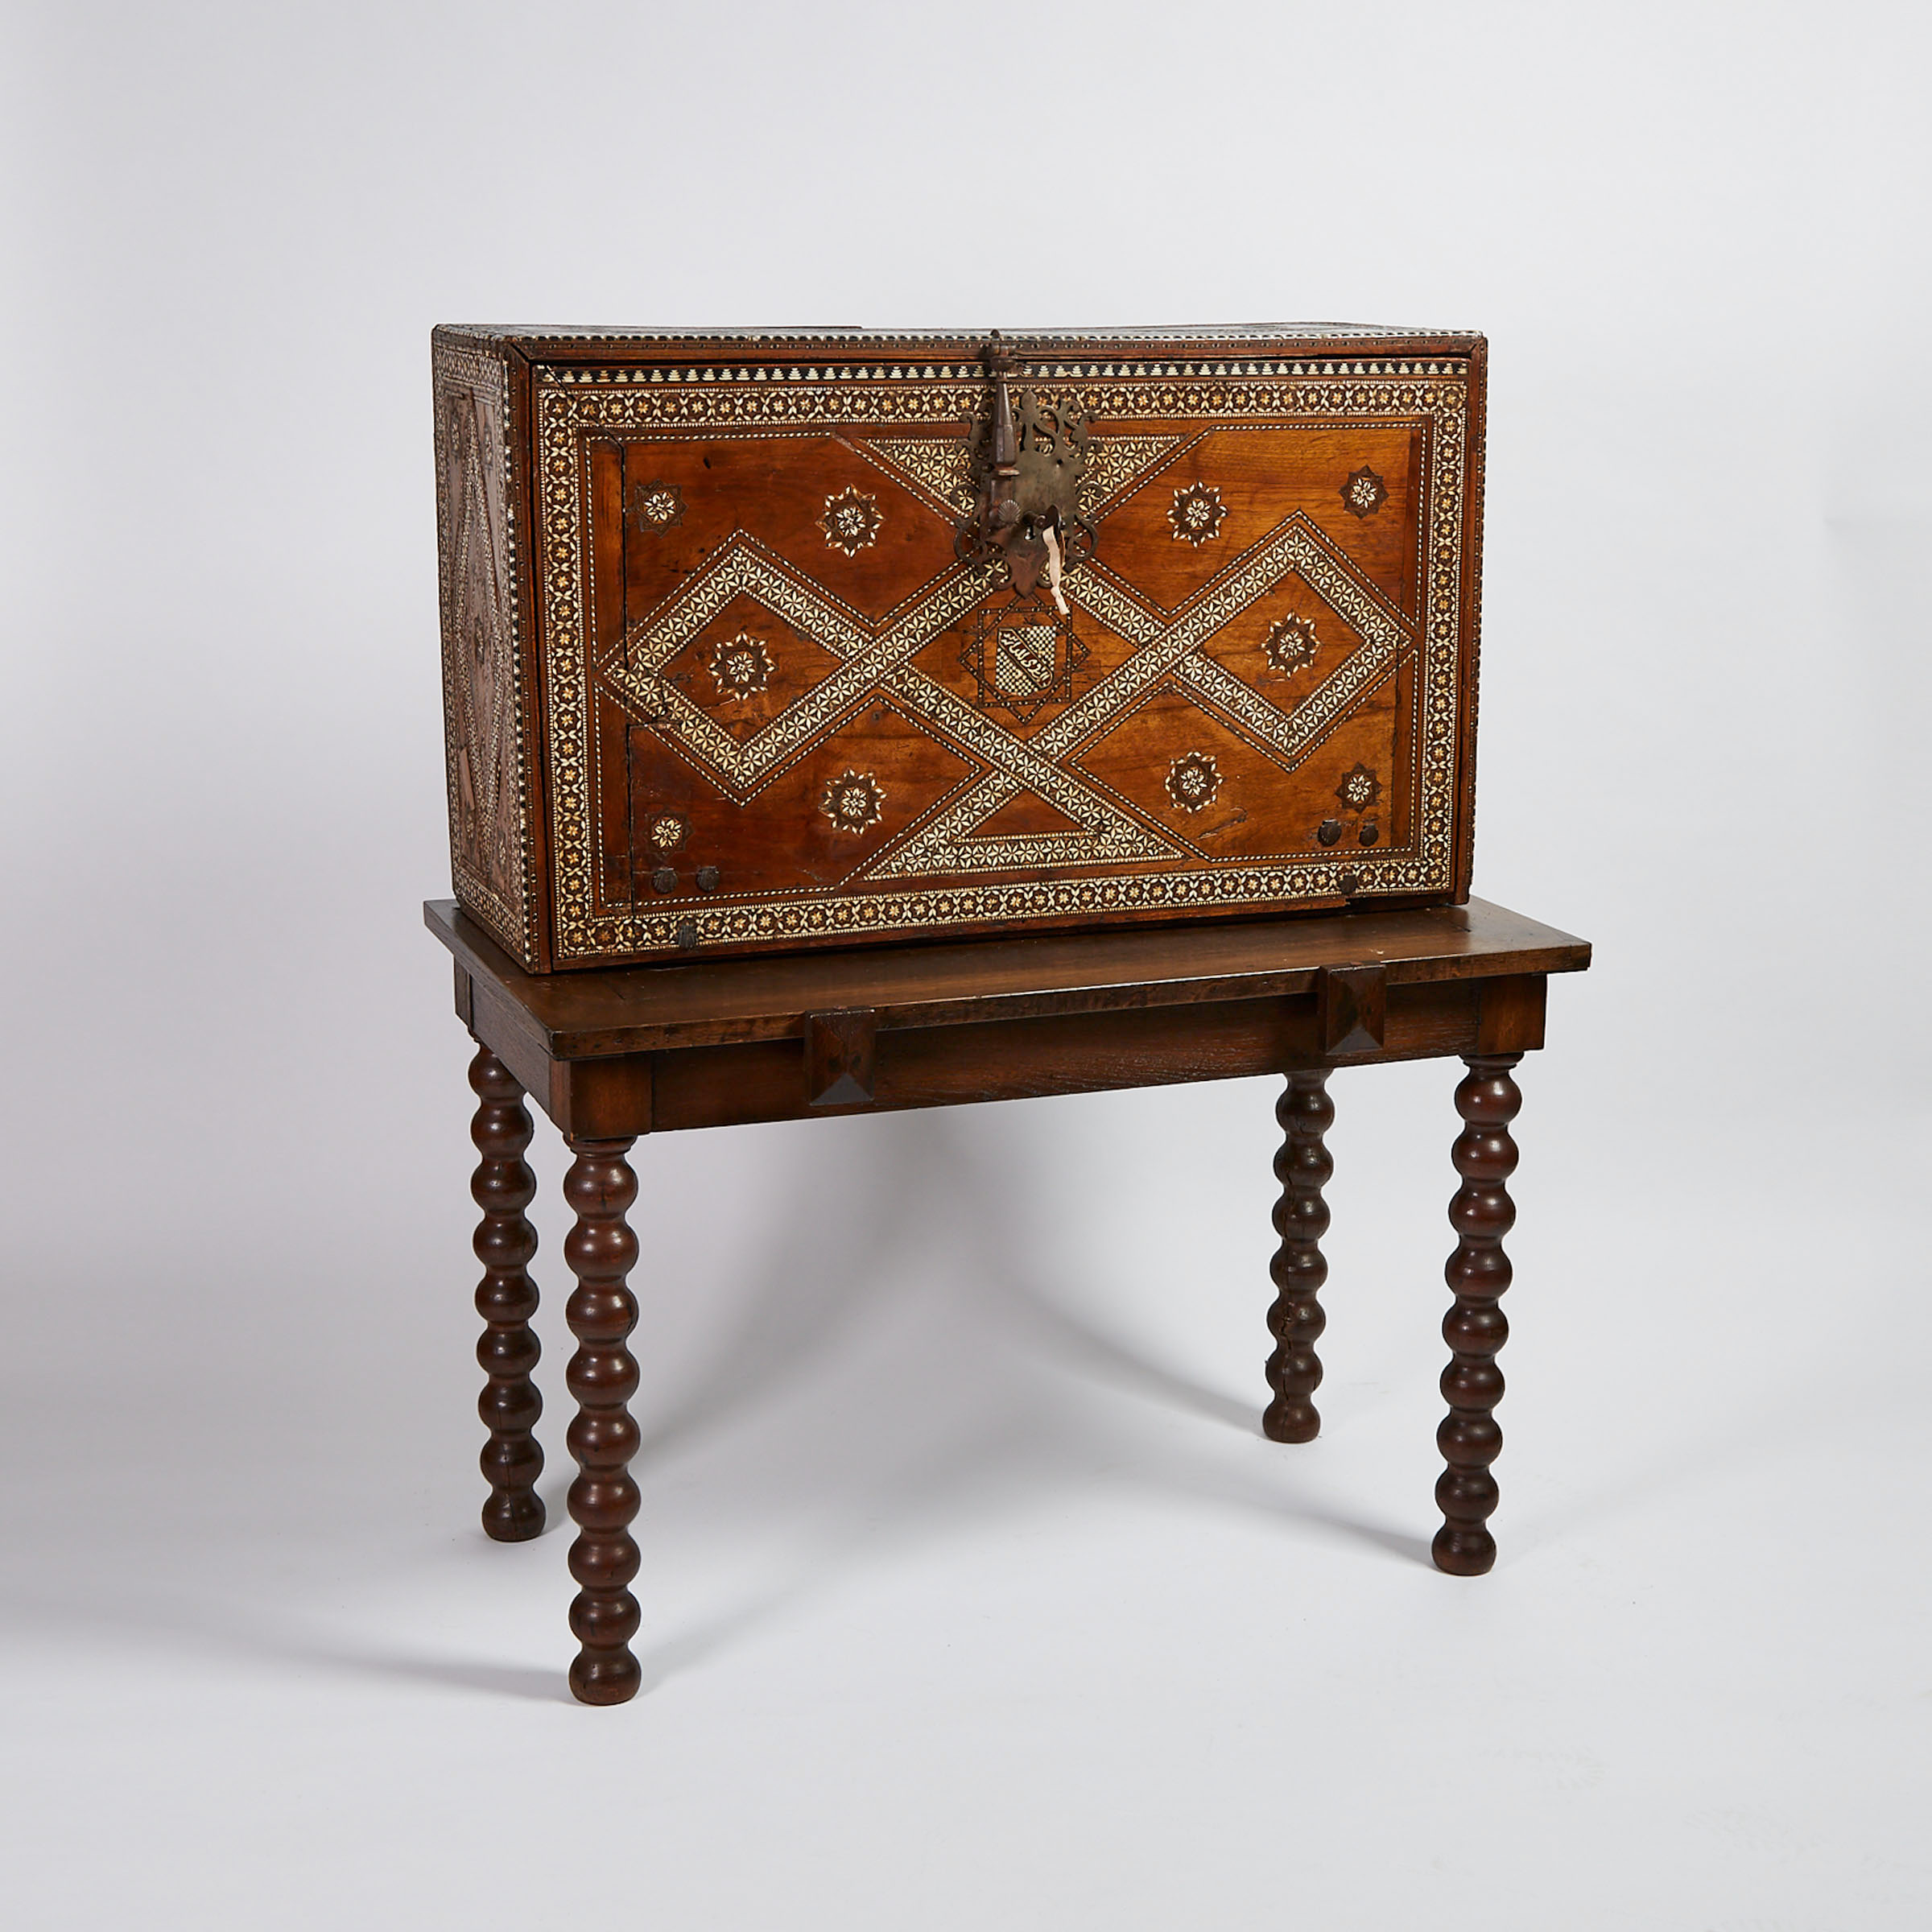 Spanish Walnut Vargueño Desk on Stand, 17th century and later